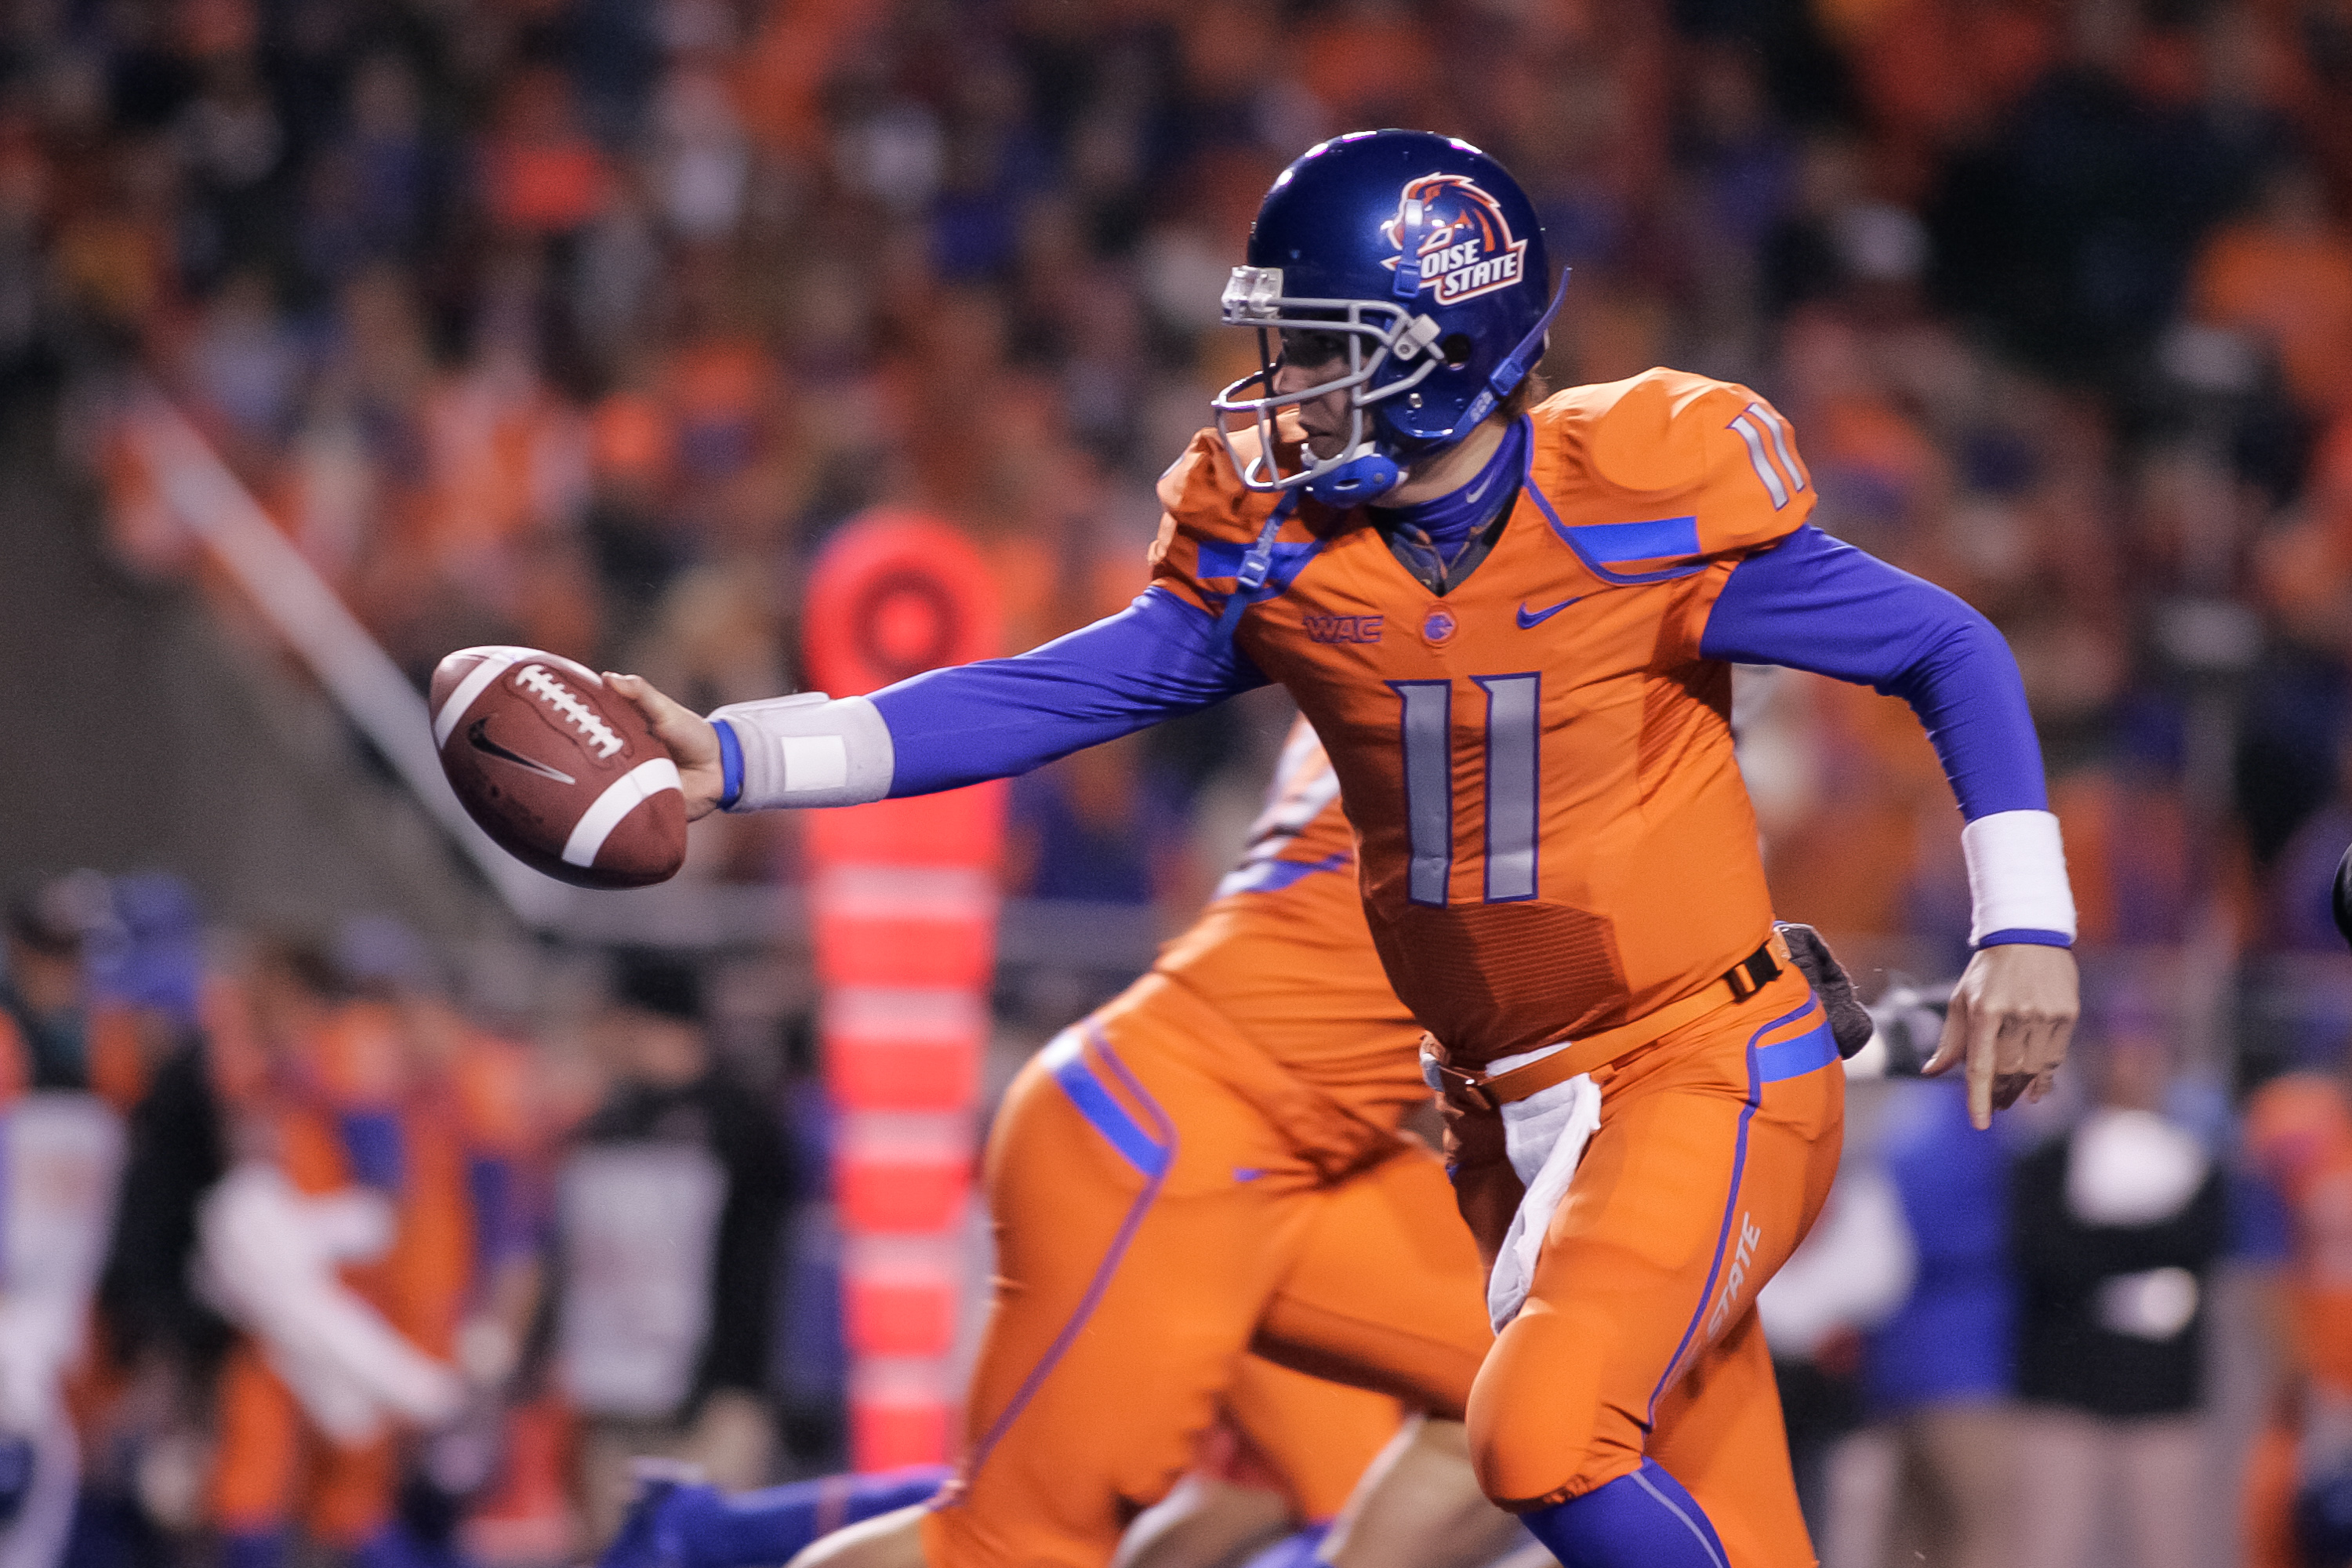 BOISE, ID - NOVEMBER 19:  Kellen Moore #11 of the Boise State Broncos hands off the ball against the Fresno State Bulldogs at Bronco Stadium on November 19, 2010 in Boise, Idaho.  (Photo by Otto Kitsinger III/Getty Images)